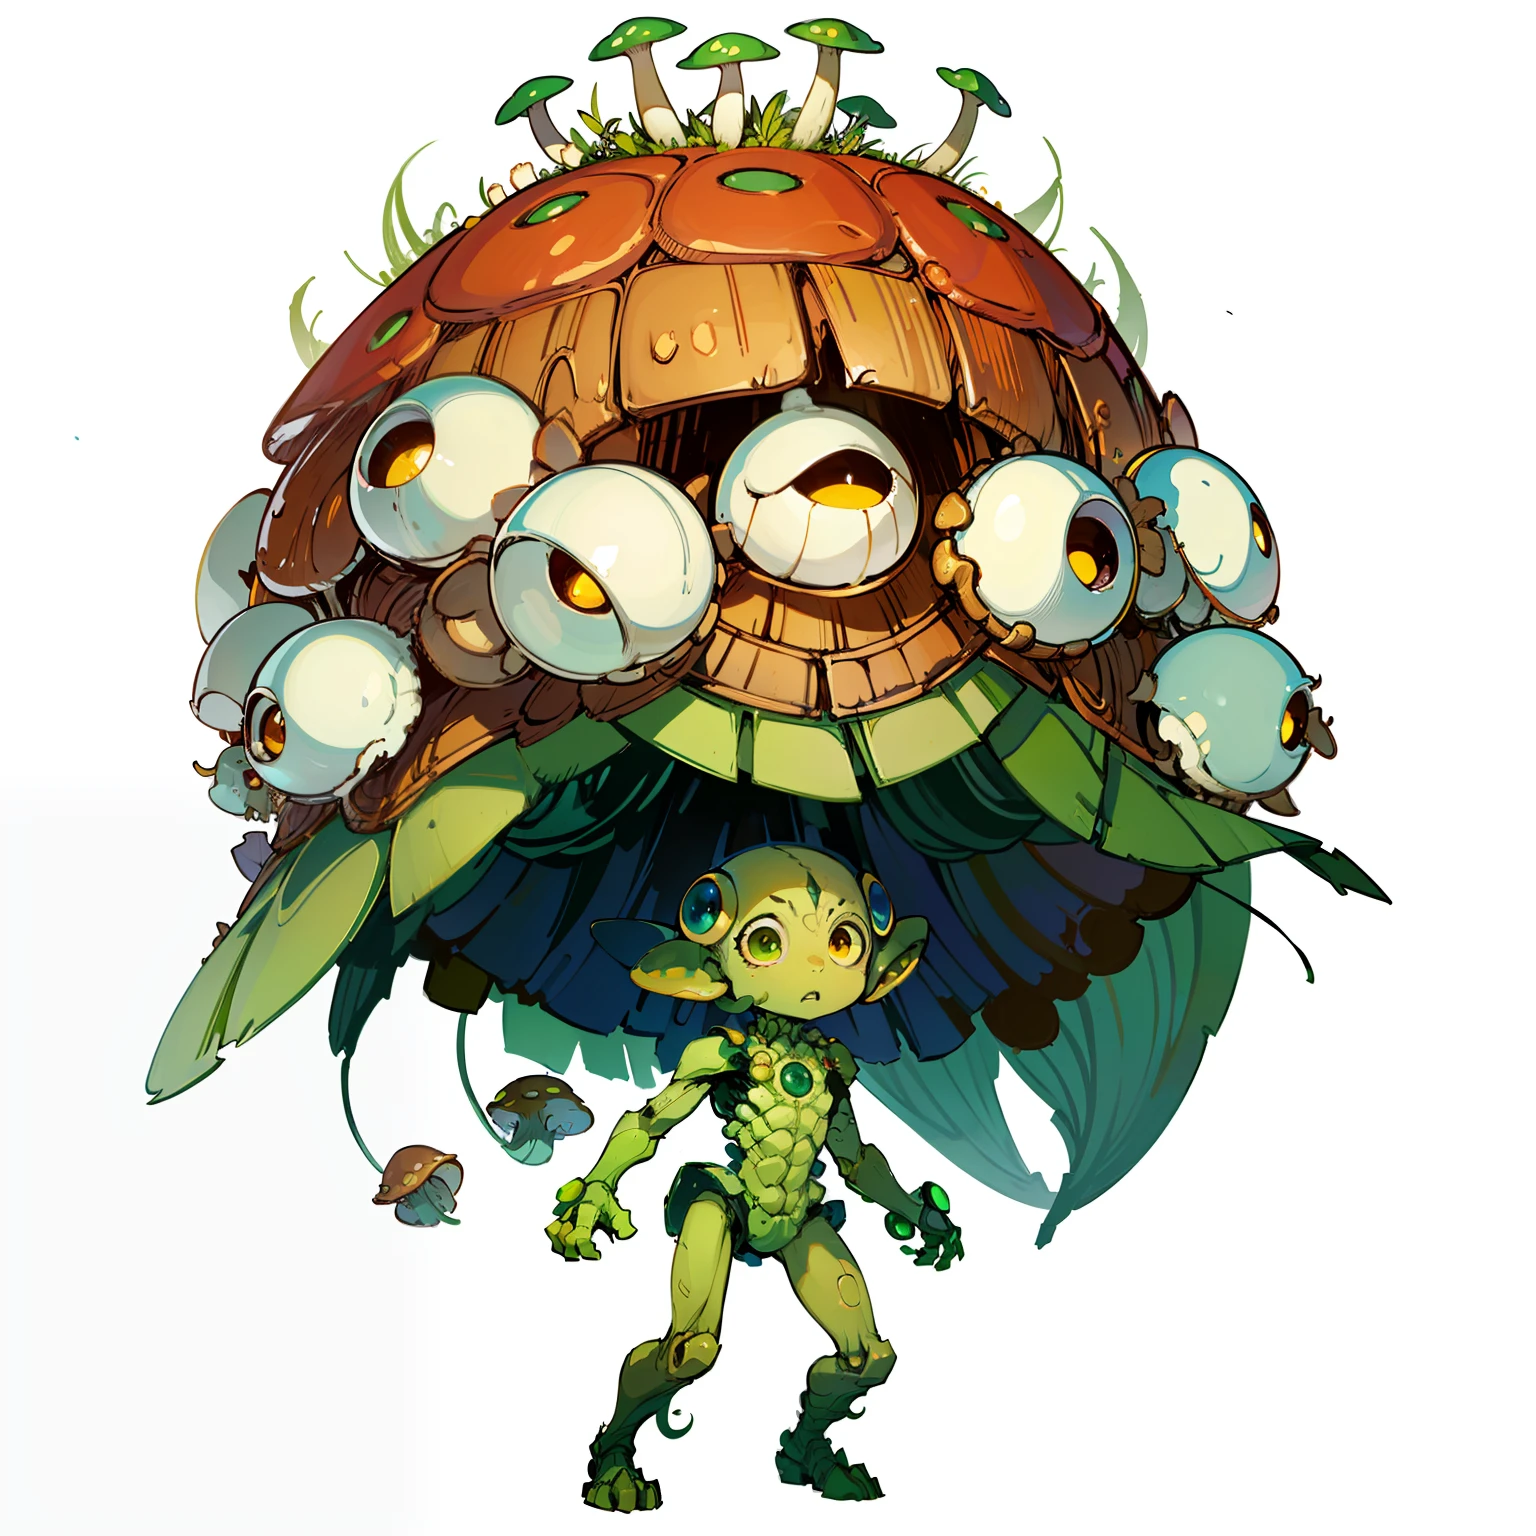 Full body shot, No background, White background, Mushroom Monster, alien, short limbs combined face and body,, Chibi, Round eyes, Yellow and green skin, NOhumans, Male,